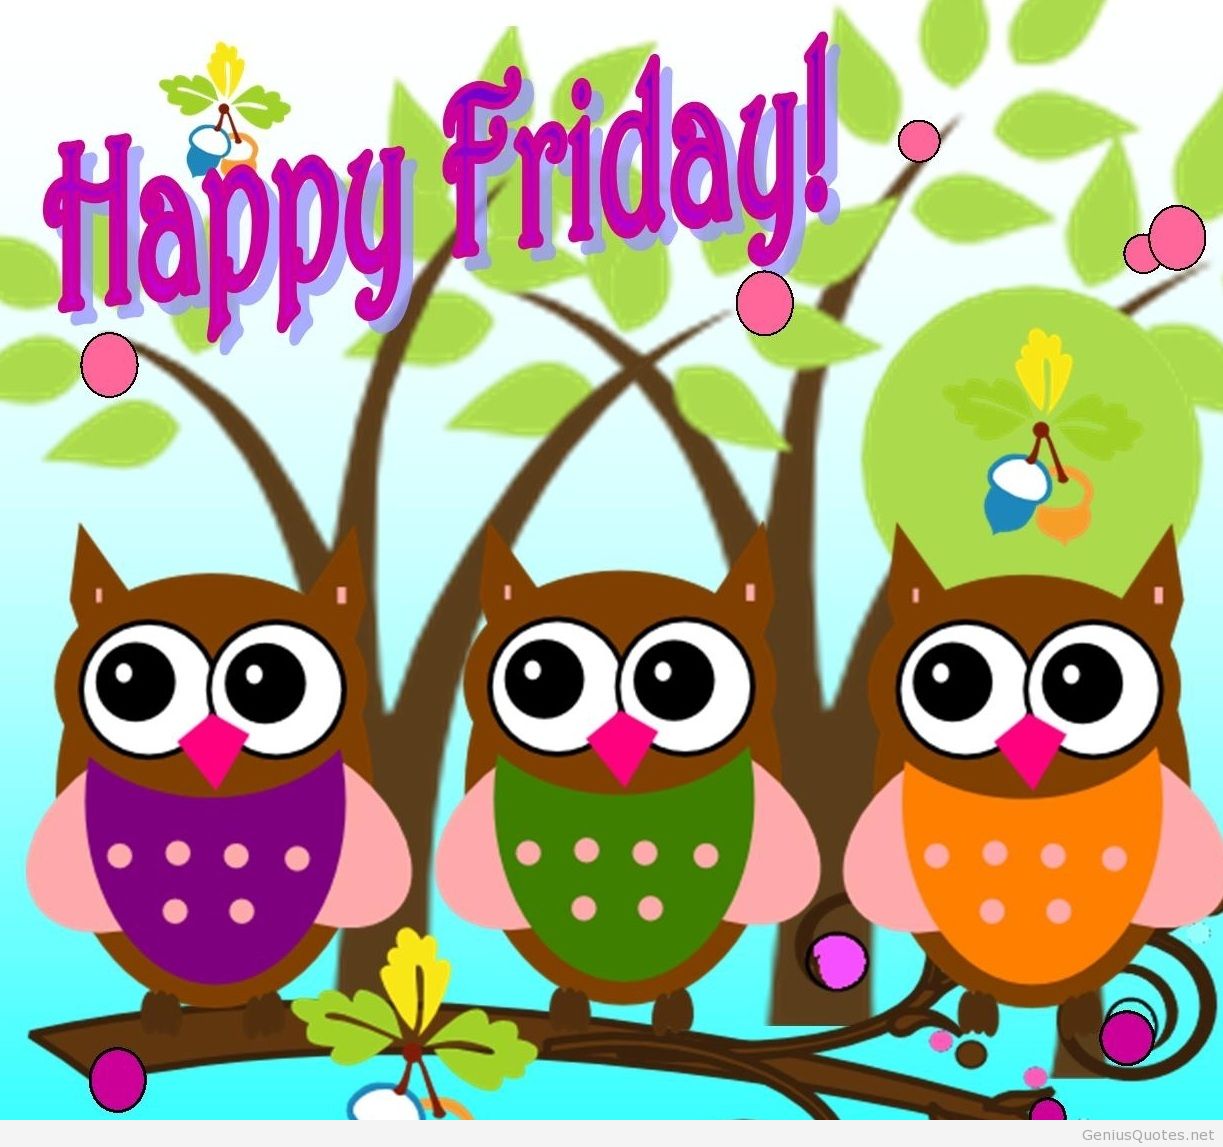 Happy Friday Cartoon Image Png PNG Clipart from Celebration Friday category...